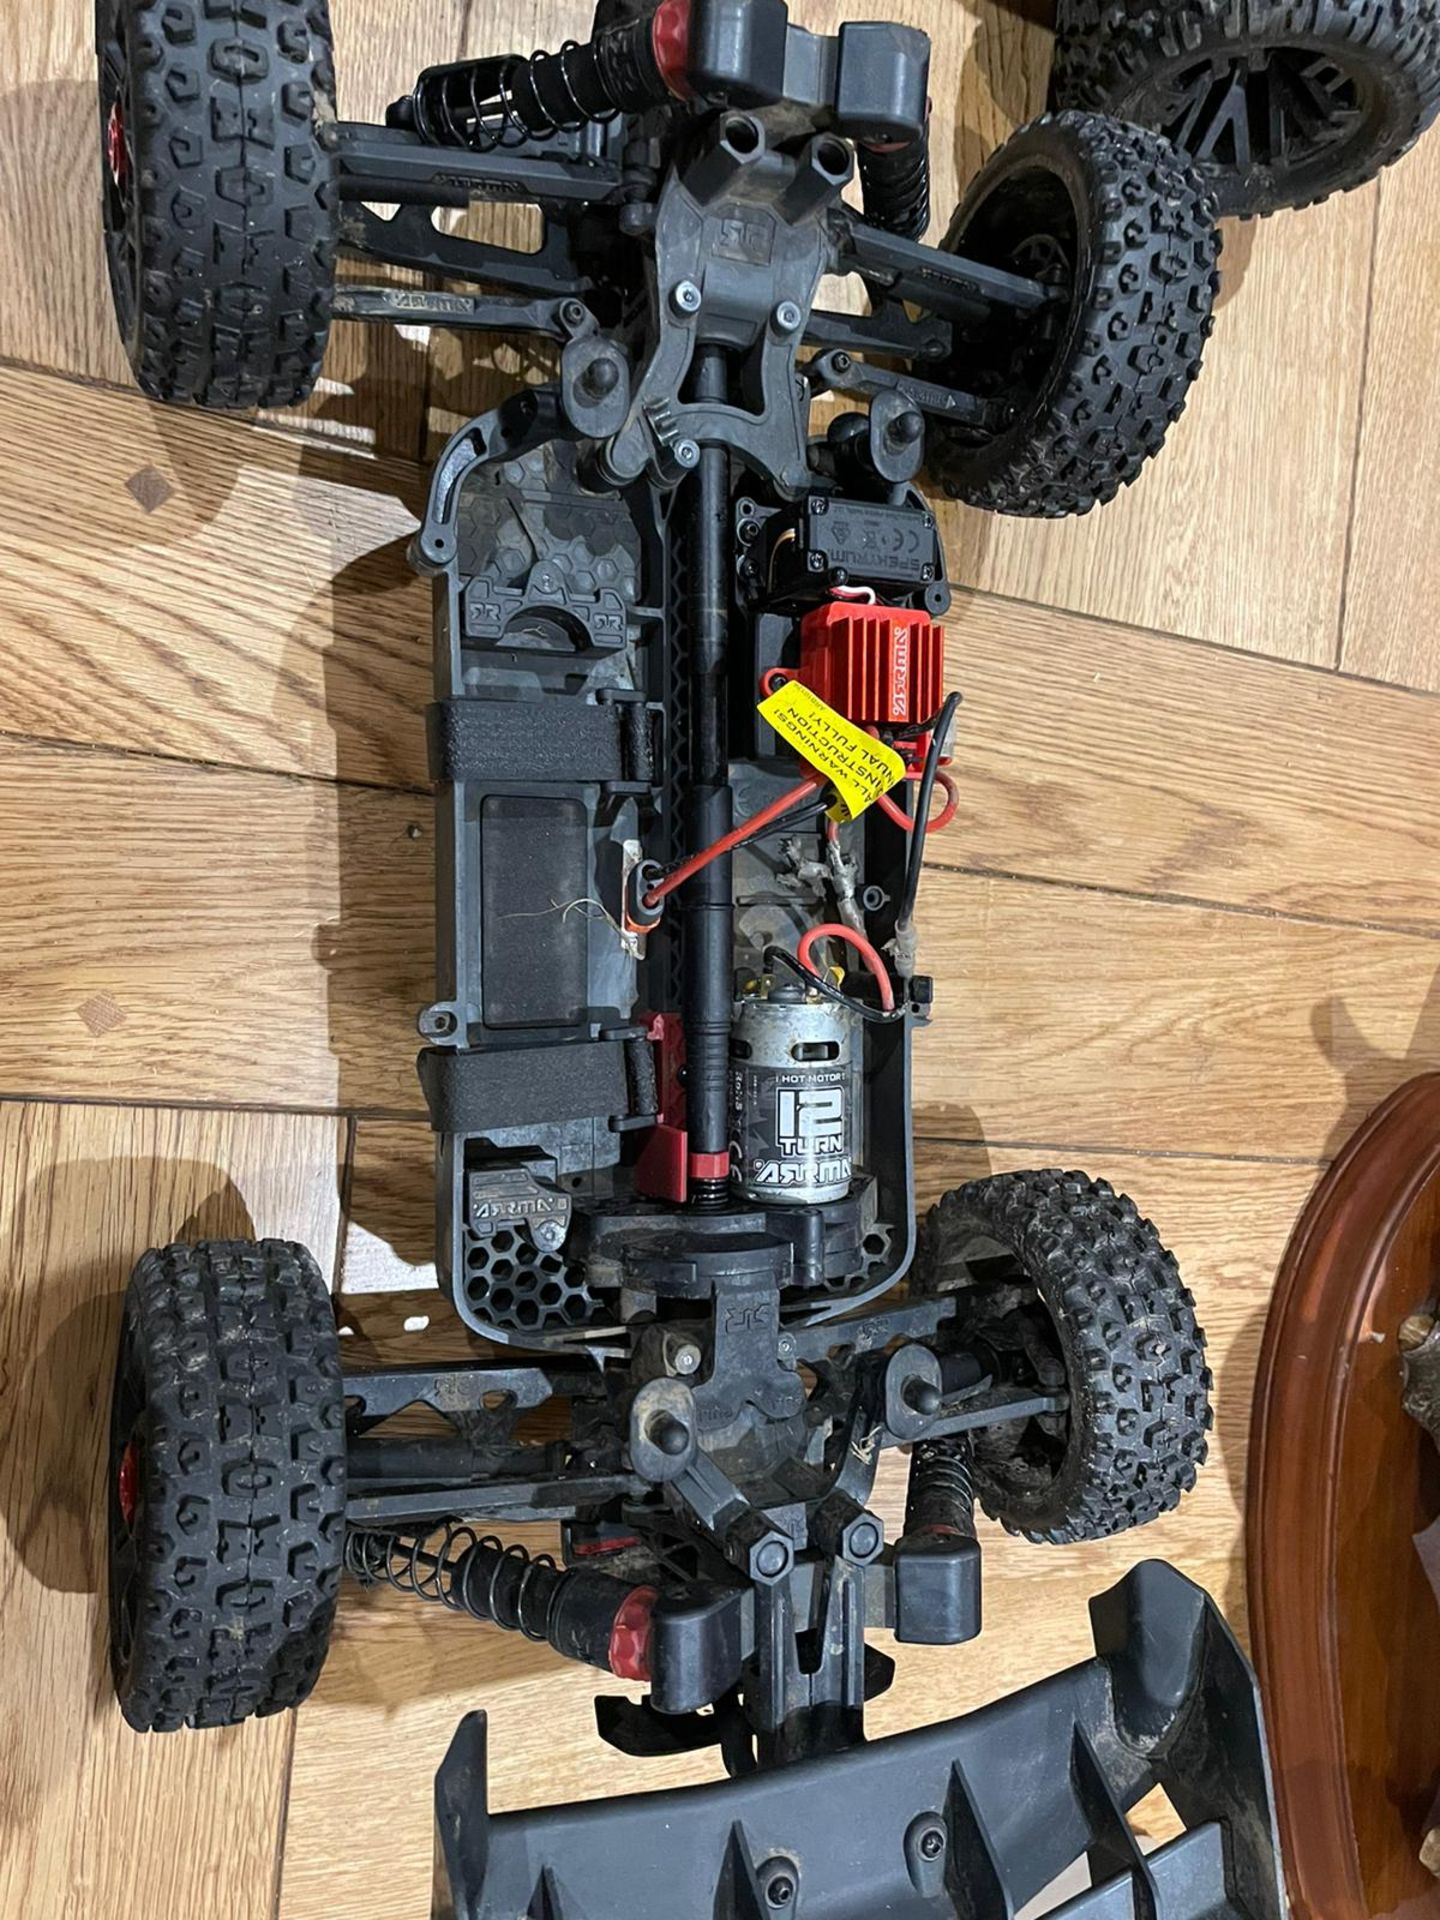 ARRMA TYPHON RC CAR, ALL WORKS, C/W 2 BATTERIES, REMOTE, LIKE NEW BOUGHT 2 WEEKS AGO (BOXED) *NO VAT - Image 2 of 11